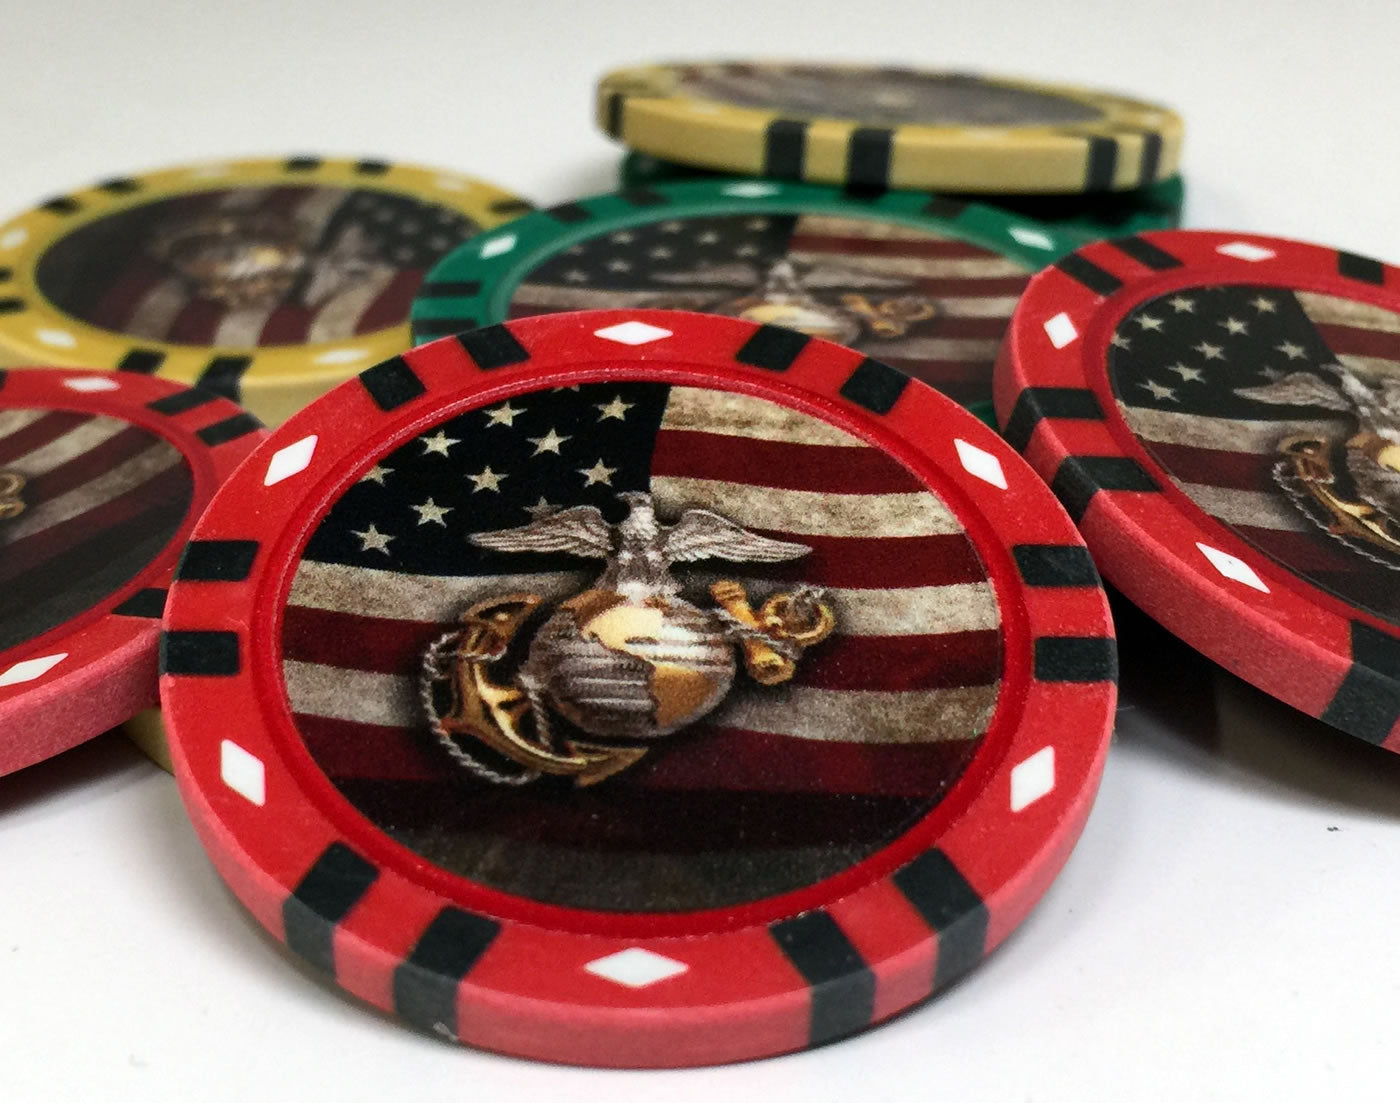 Custom Clay Poker Sets With The Infinity Style Poker Chips